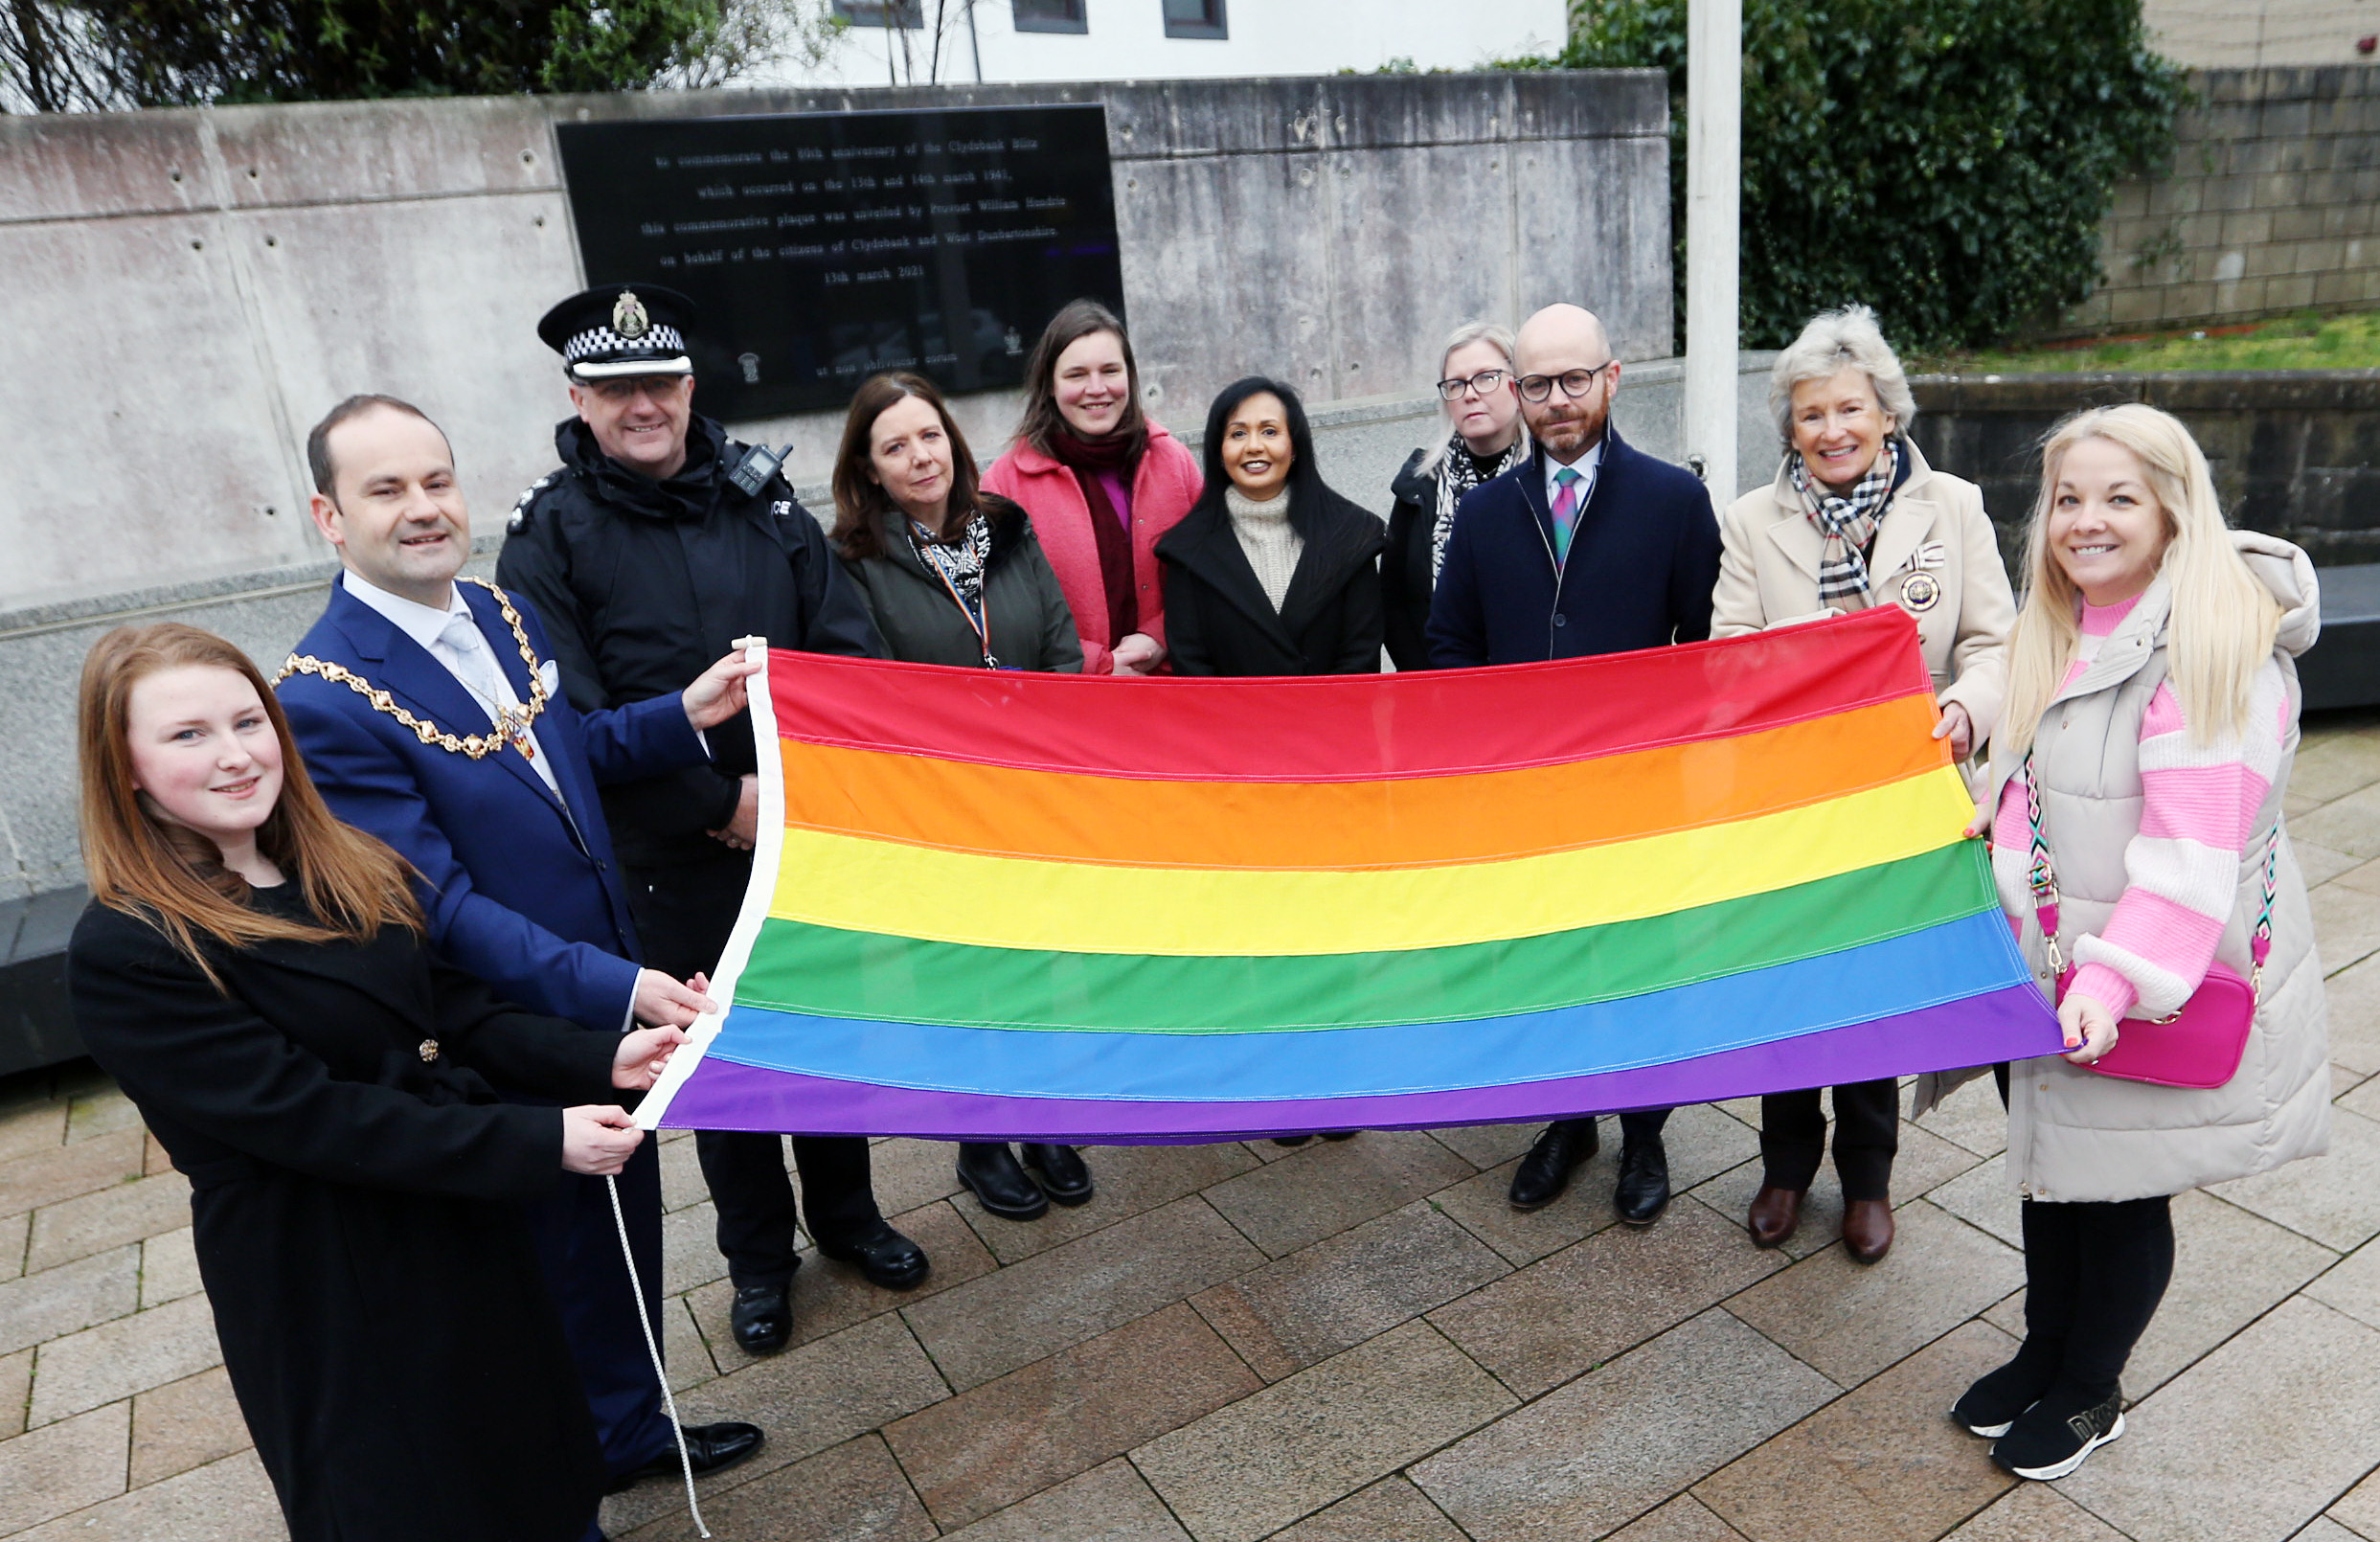 Provost Douglas McAllister led elected members and local residents in a flag-raising ceremony in Clydebank to mark LGBT+ History Month.